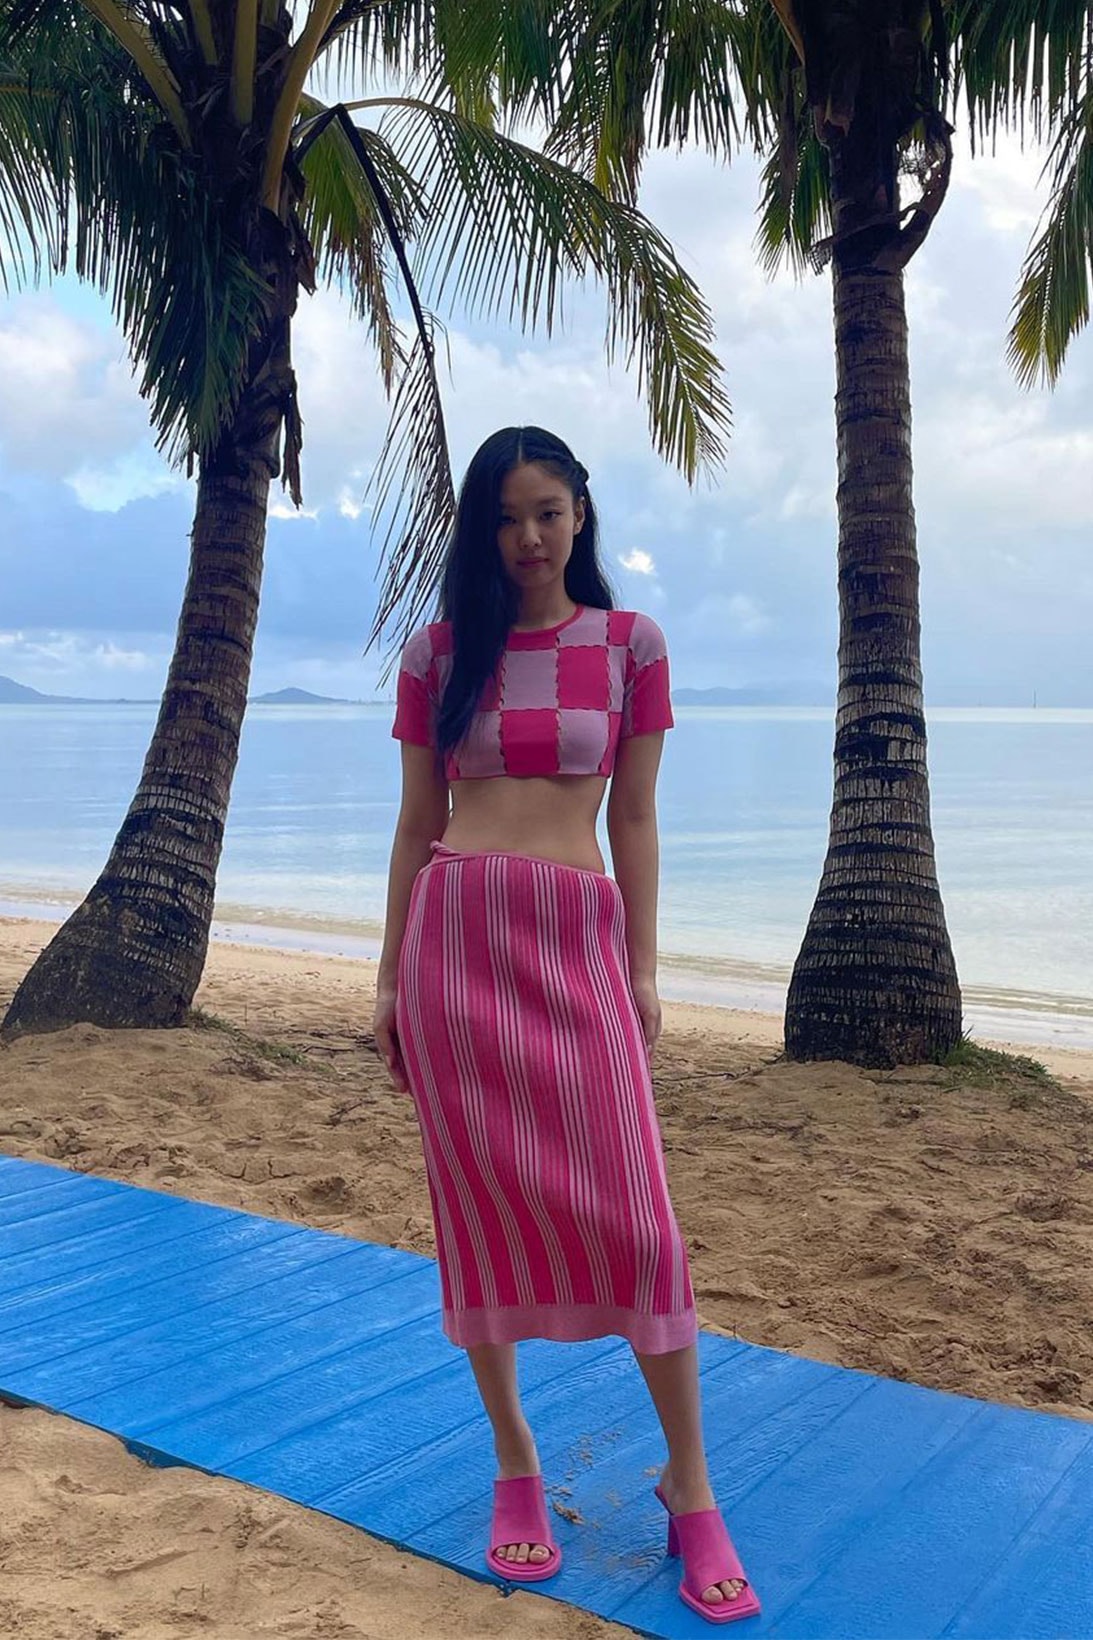 BLACKPINK Jennie Jacquemus Le Splash Hawaii Runway Show Outfit All PInk 